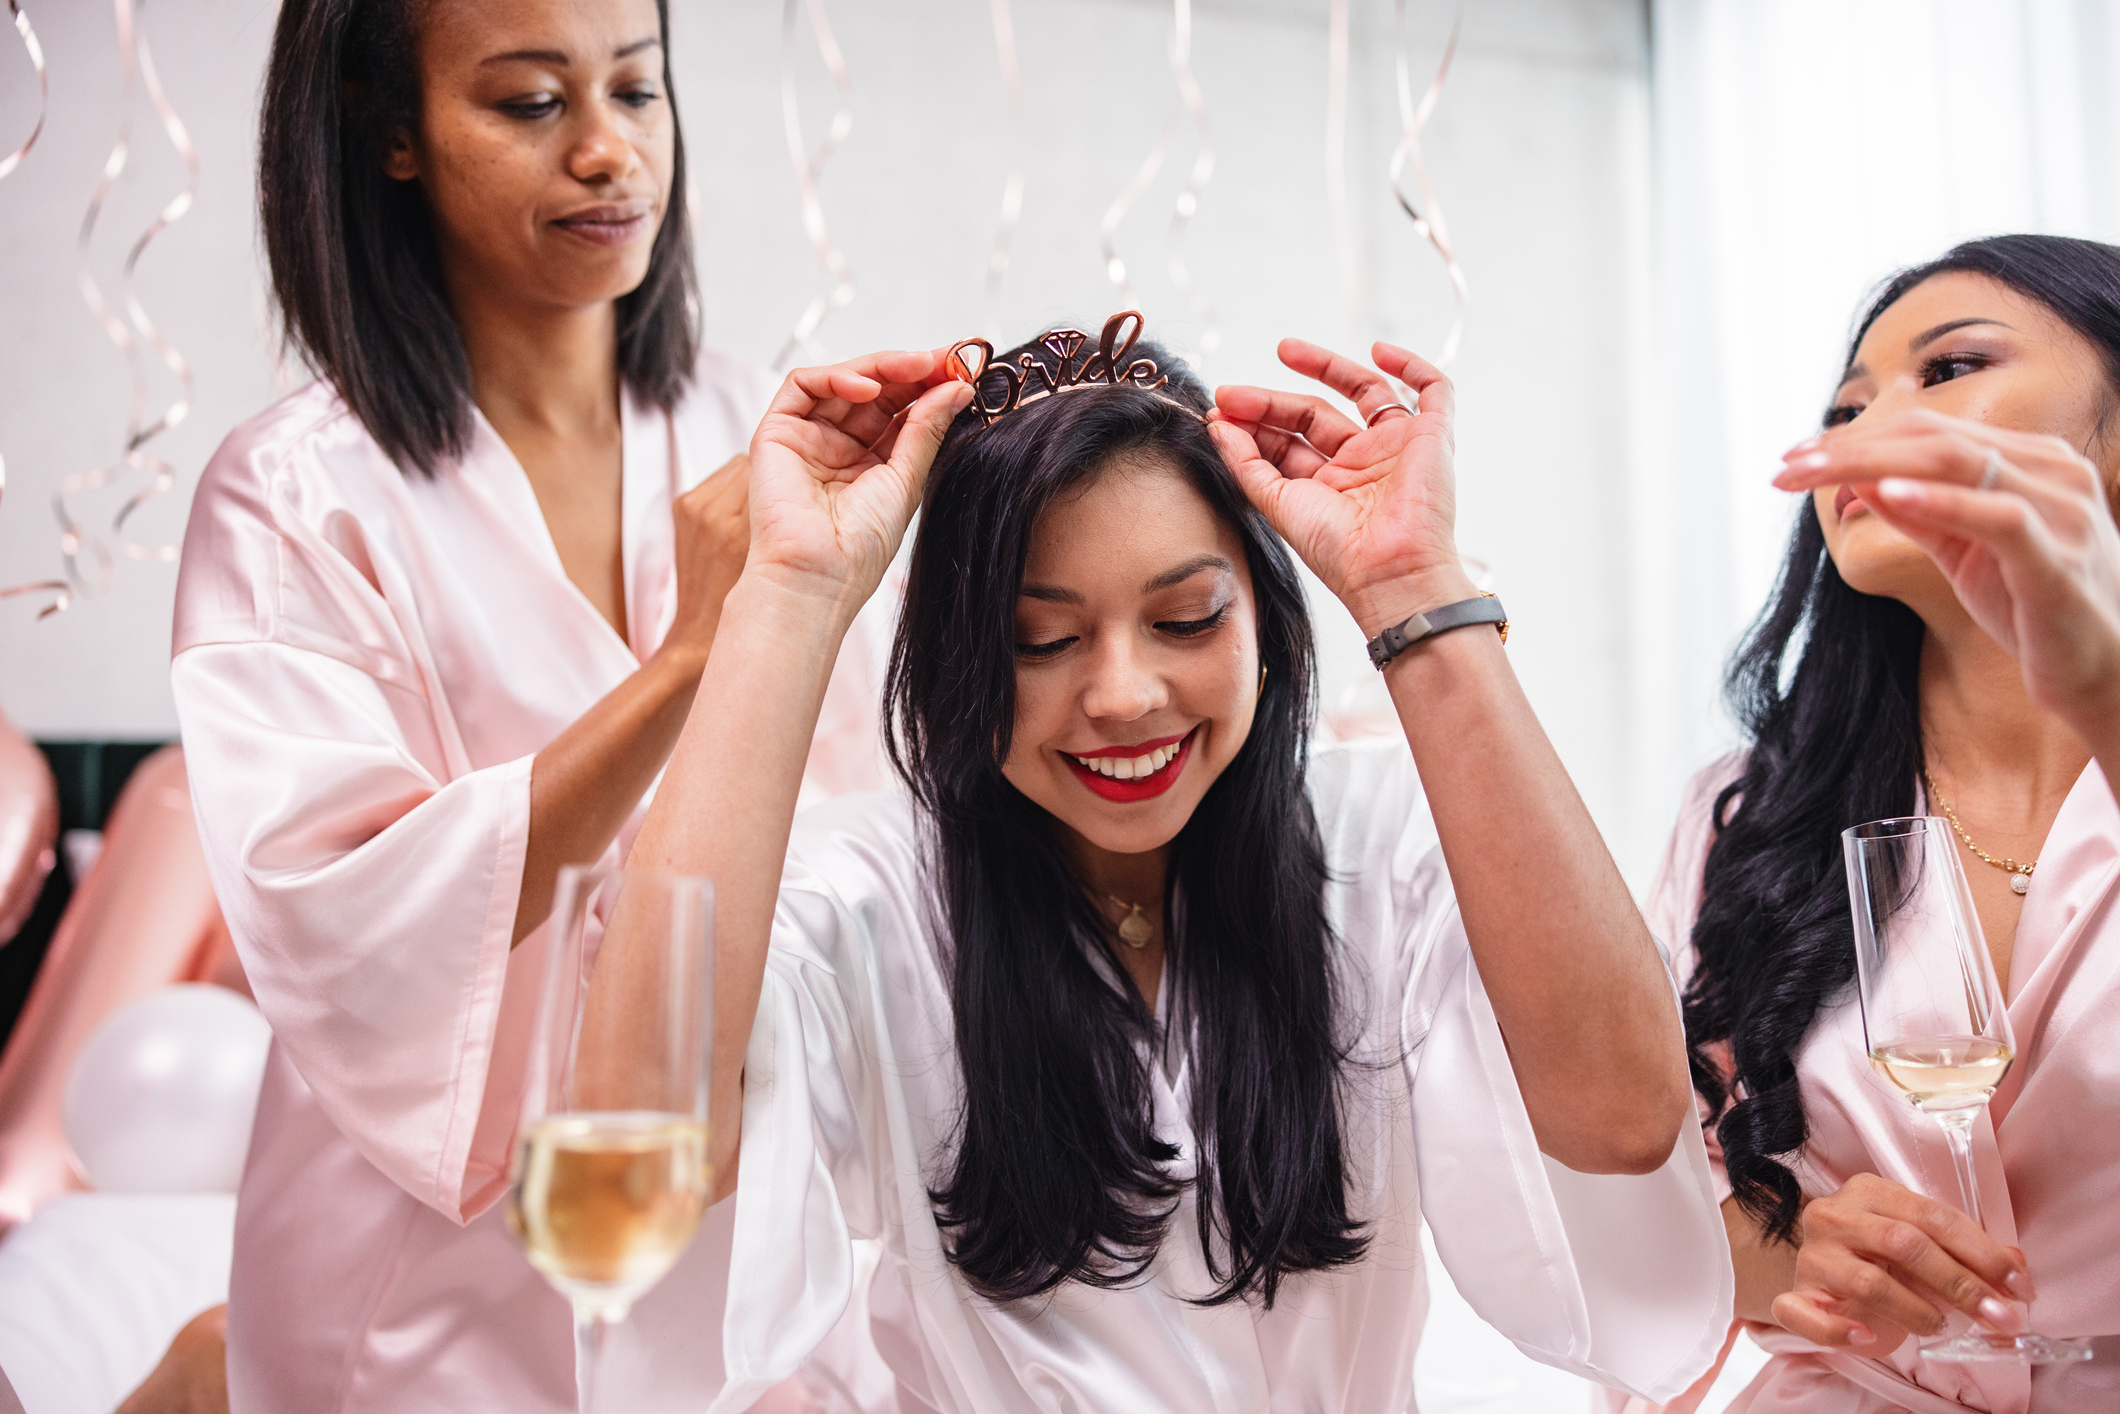 Three women celebrate, one adjusting a tiara, with drinks nearby at a baby shower